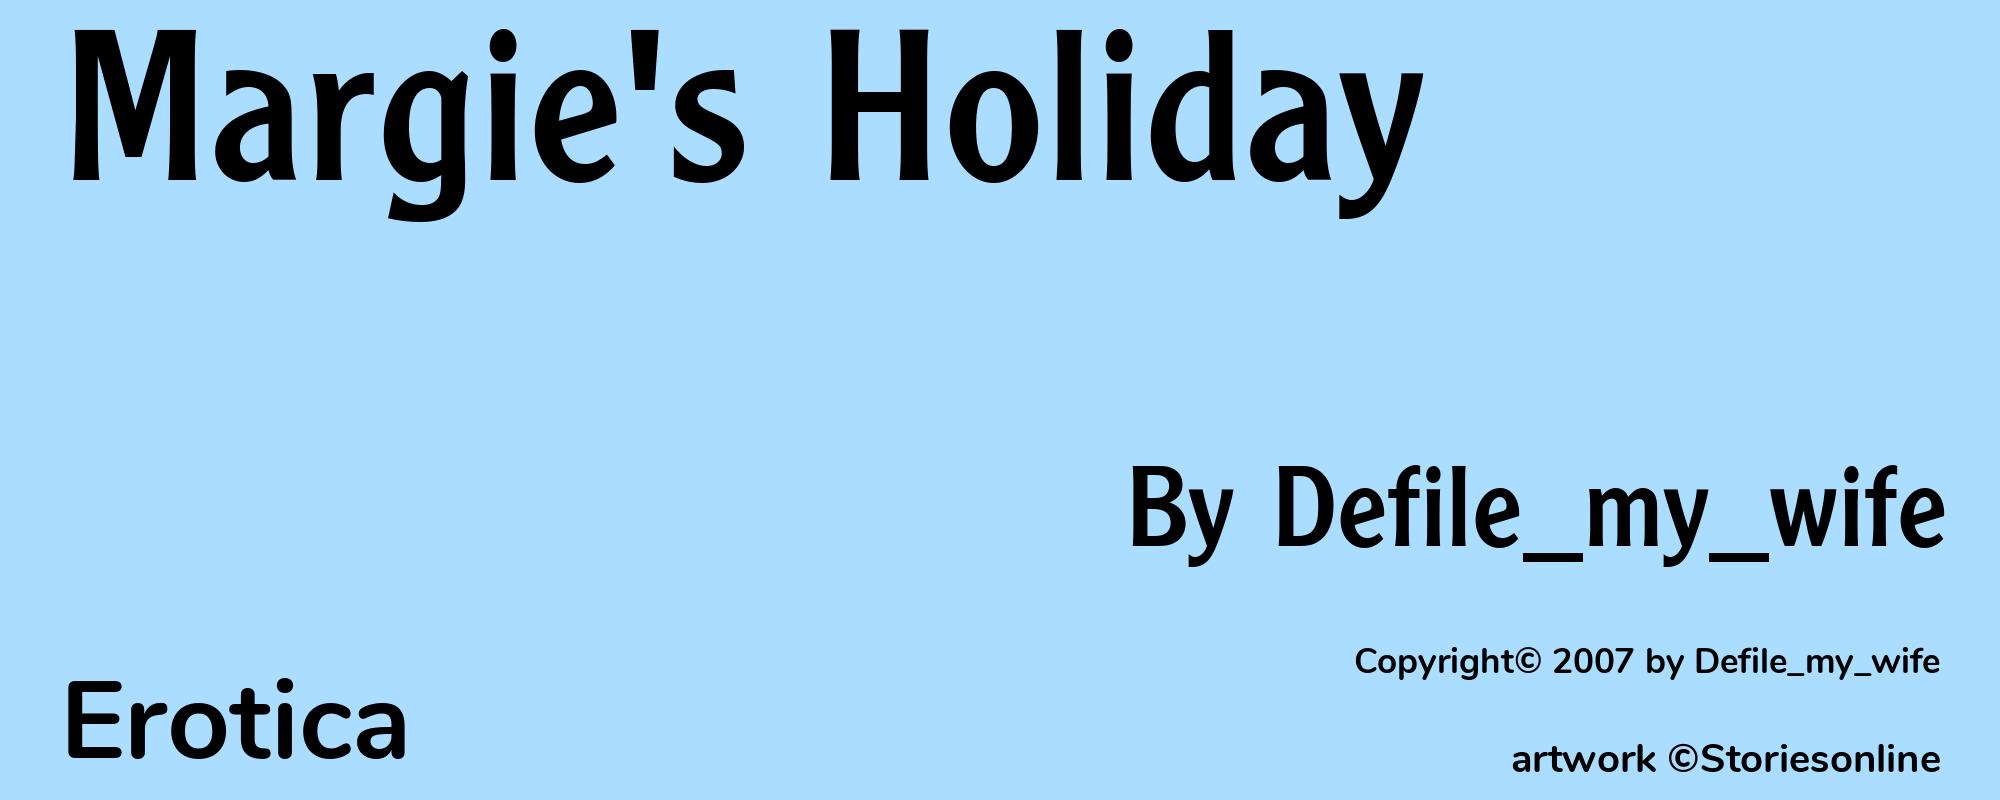 Margie's Holiday - Cover